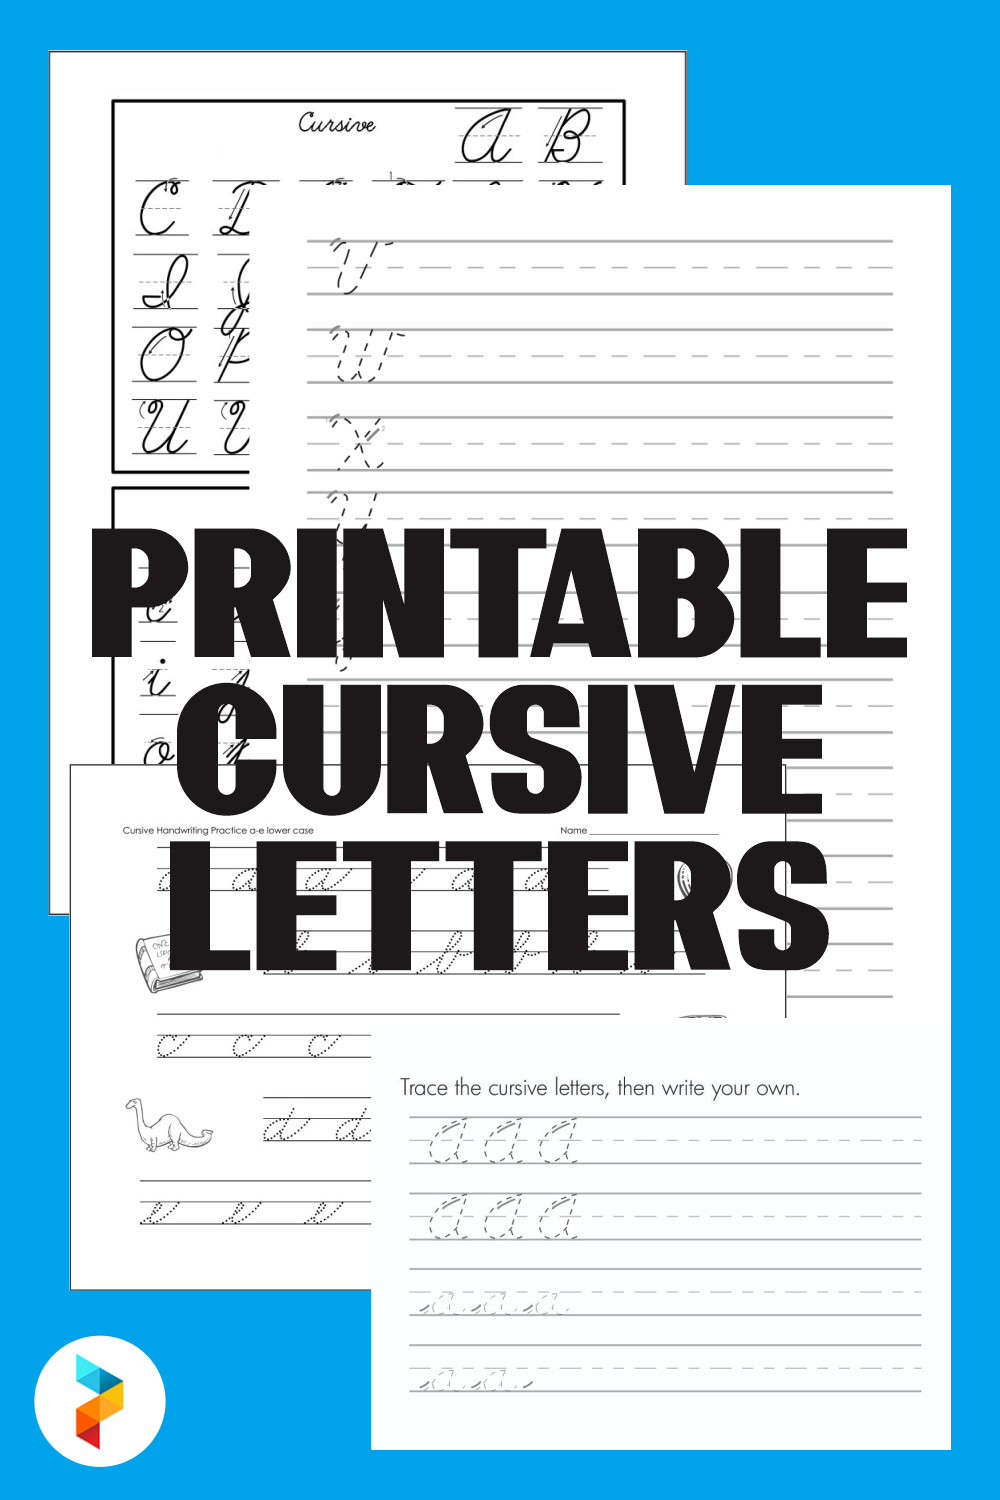 free-printable-cursive-handwriting-chart-printable-letter-a-in-cursive-writing-craft-ideas-to